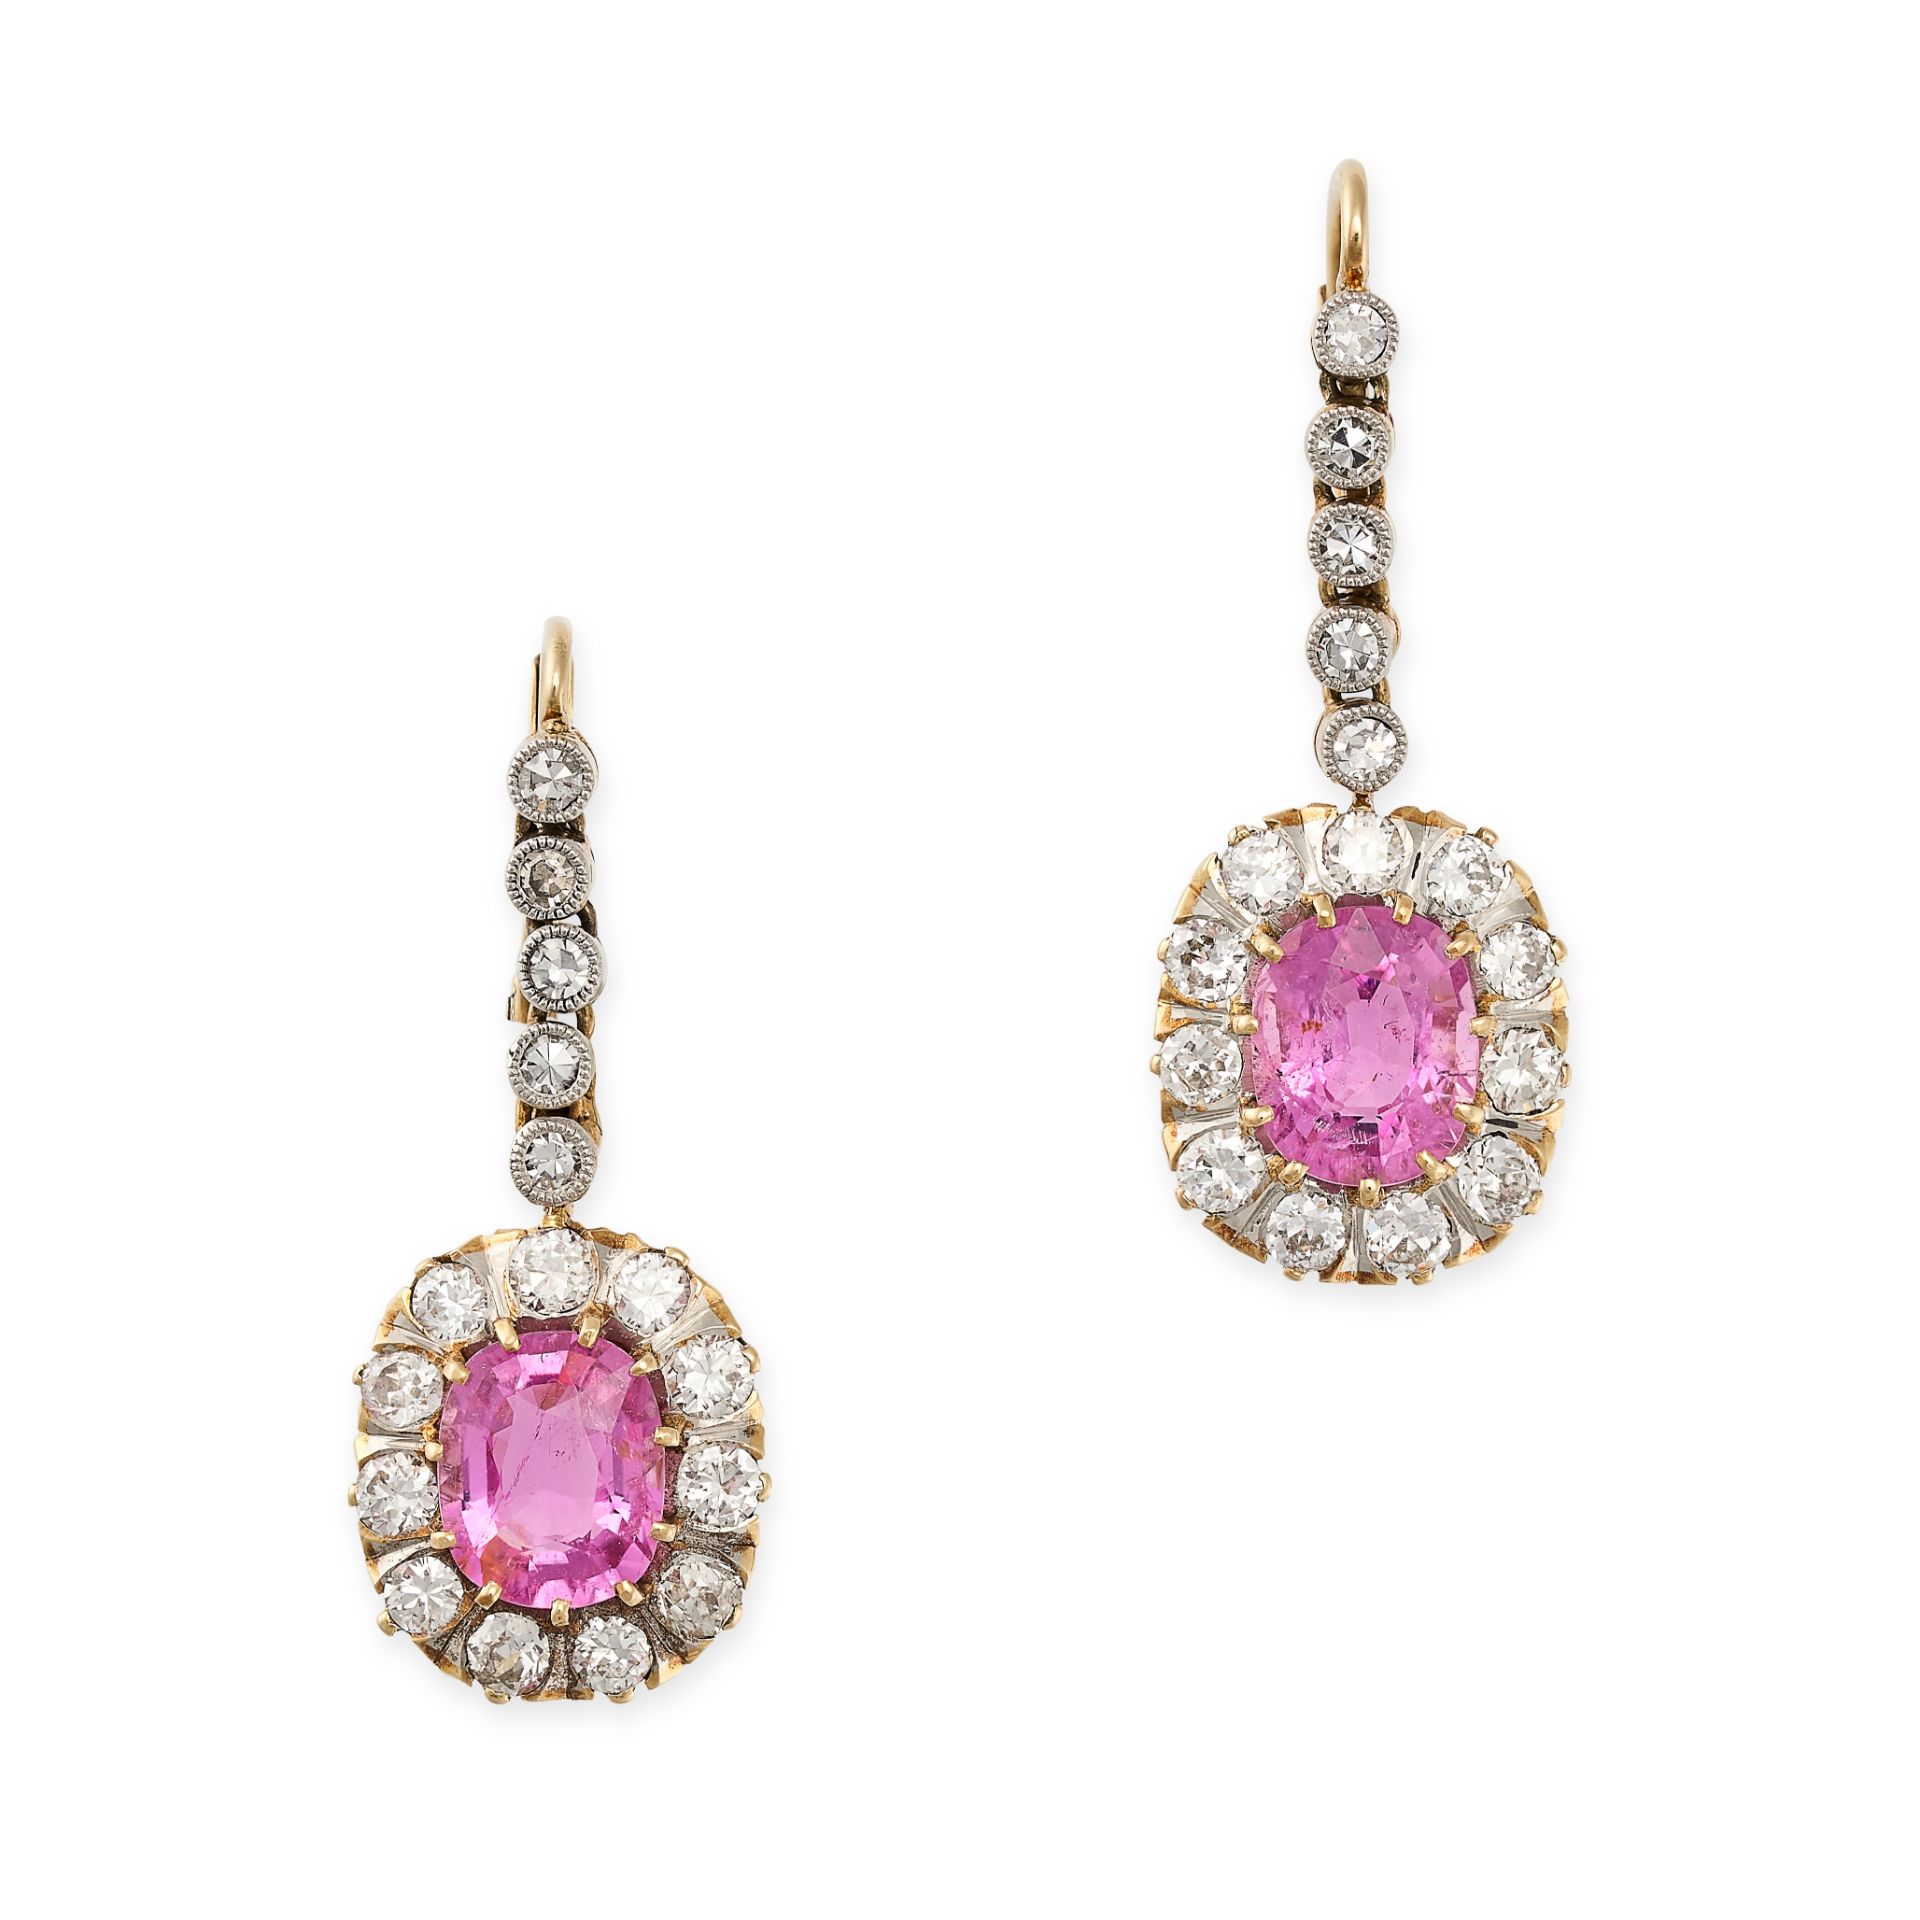 A PAIR OF PINK TOURMALINE AND DIAMOND CLUSTER DROP EARRINGS in yellow gold, each set with a cushi...